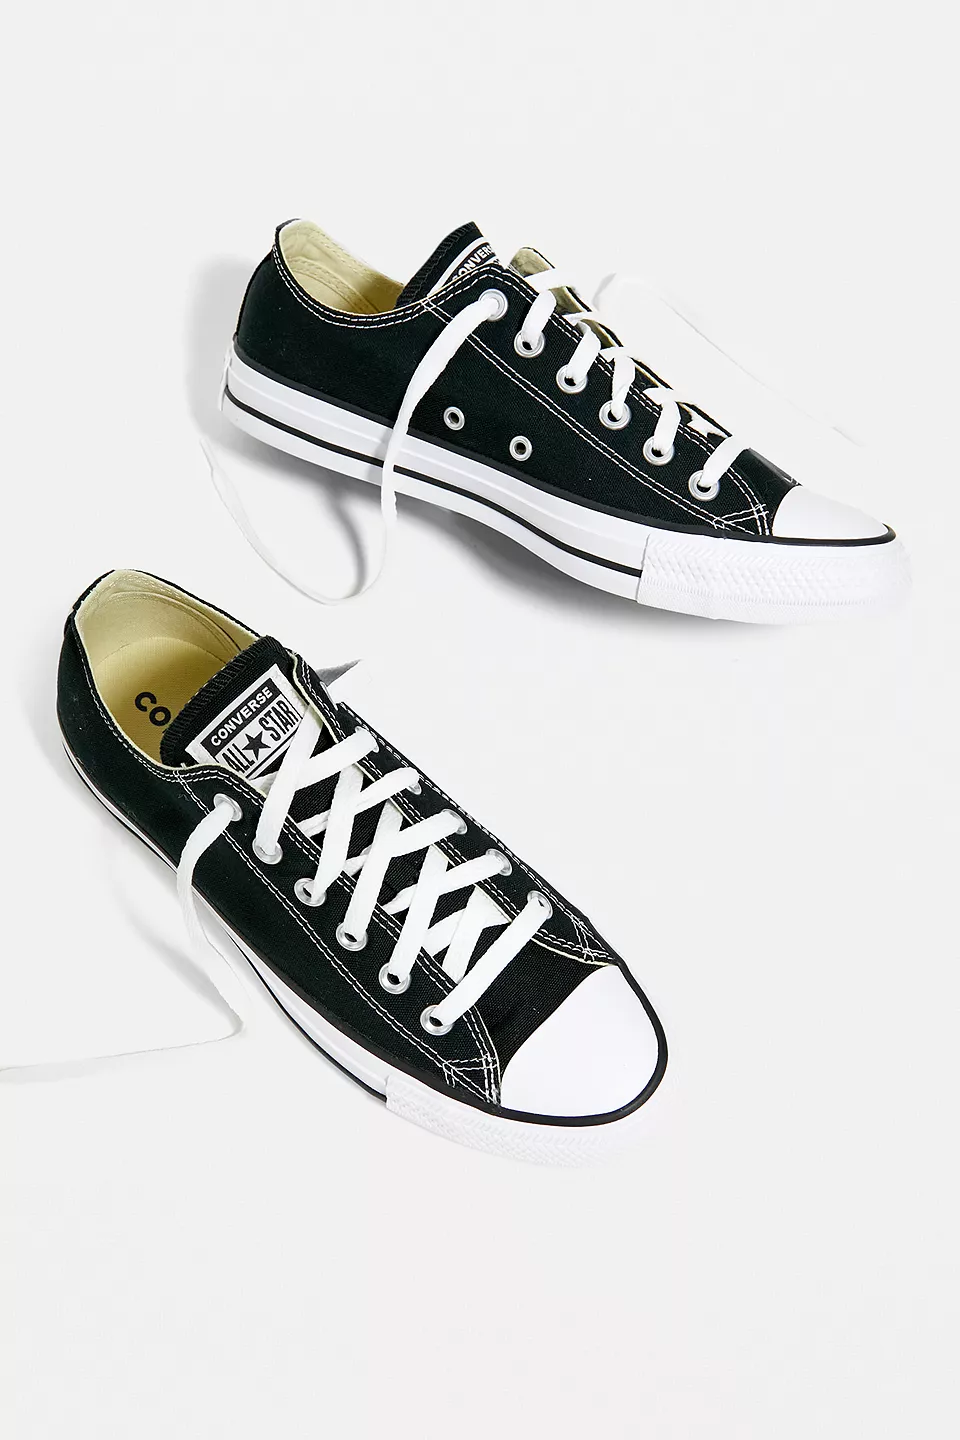 urbanoutfitters.com | Converse Black & White Chuck Taylor All Star Low Top Trainers